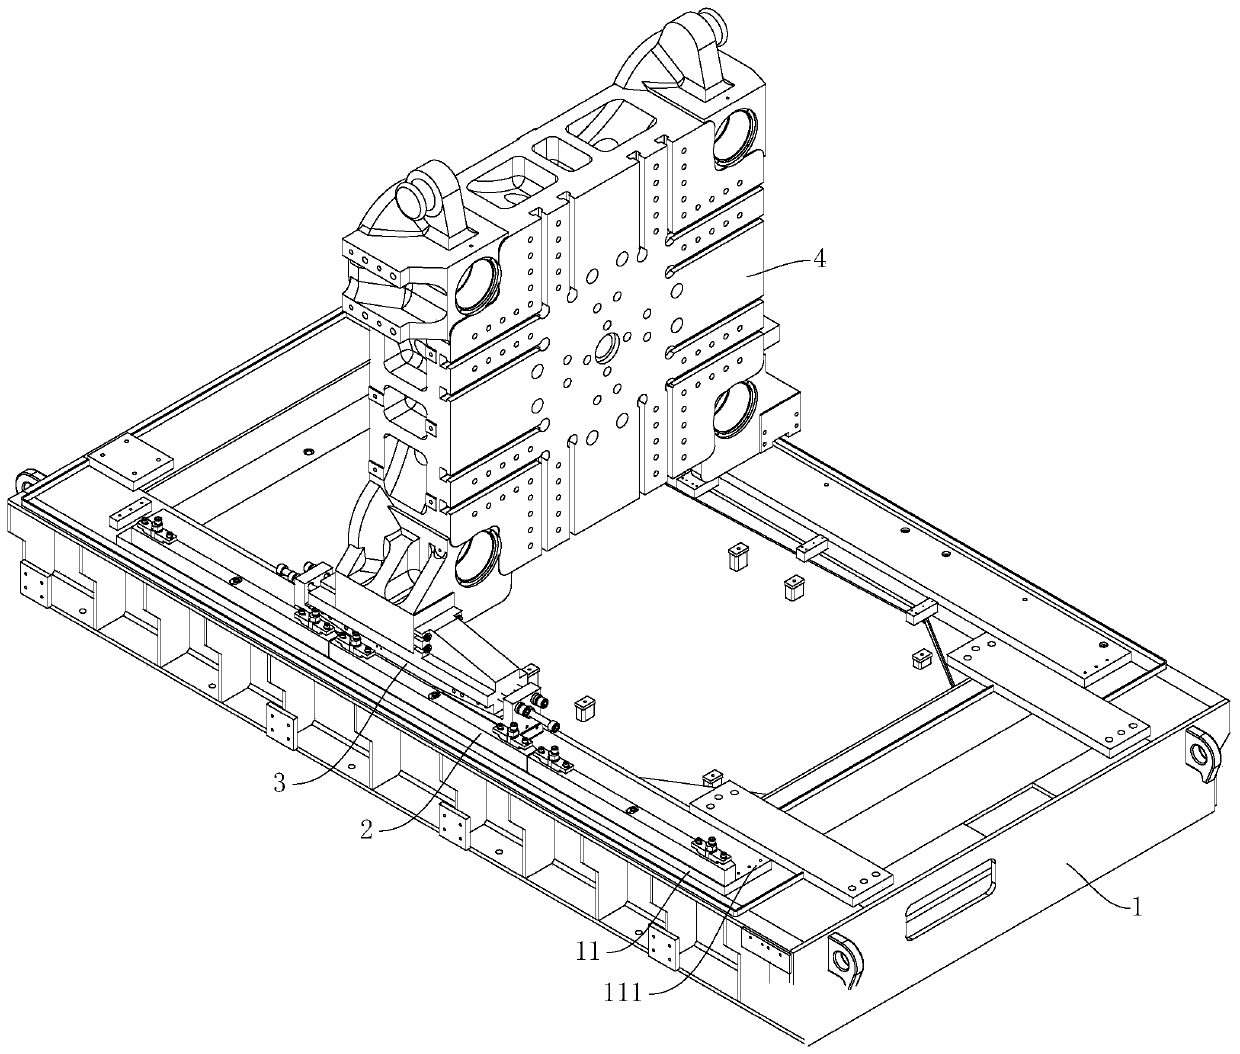 Motion guide device of injection molding motor template and injection molding machine